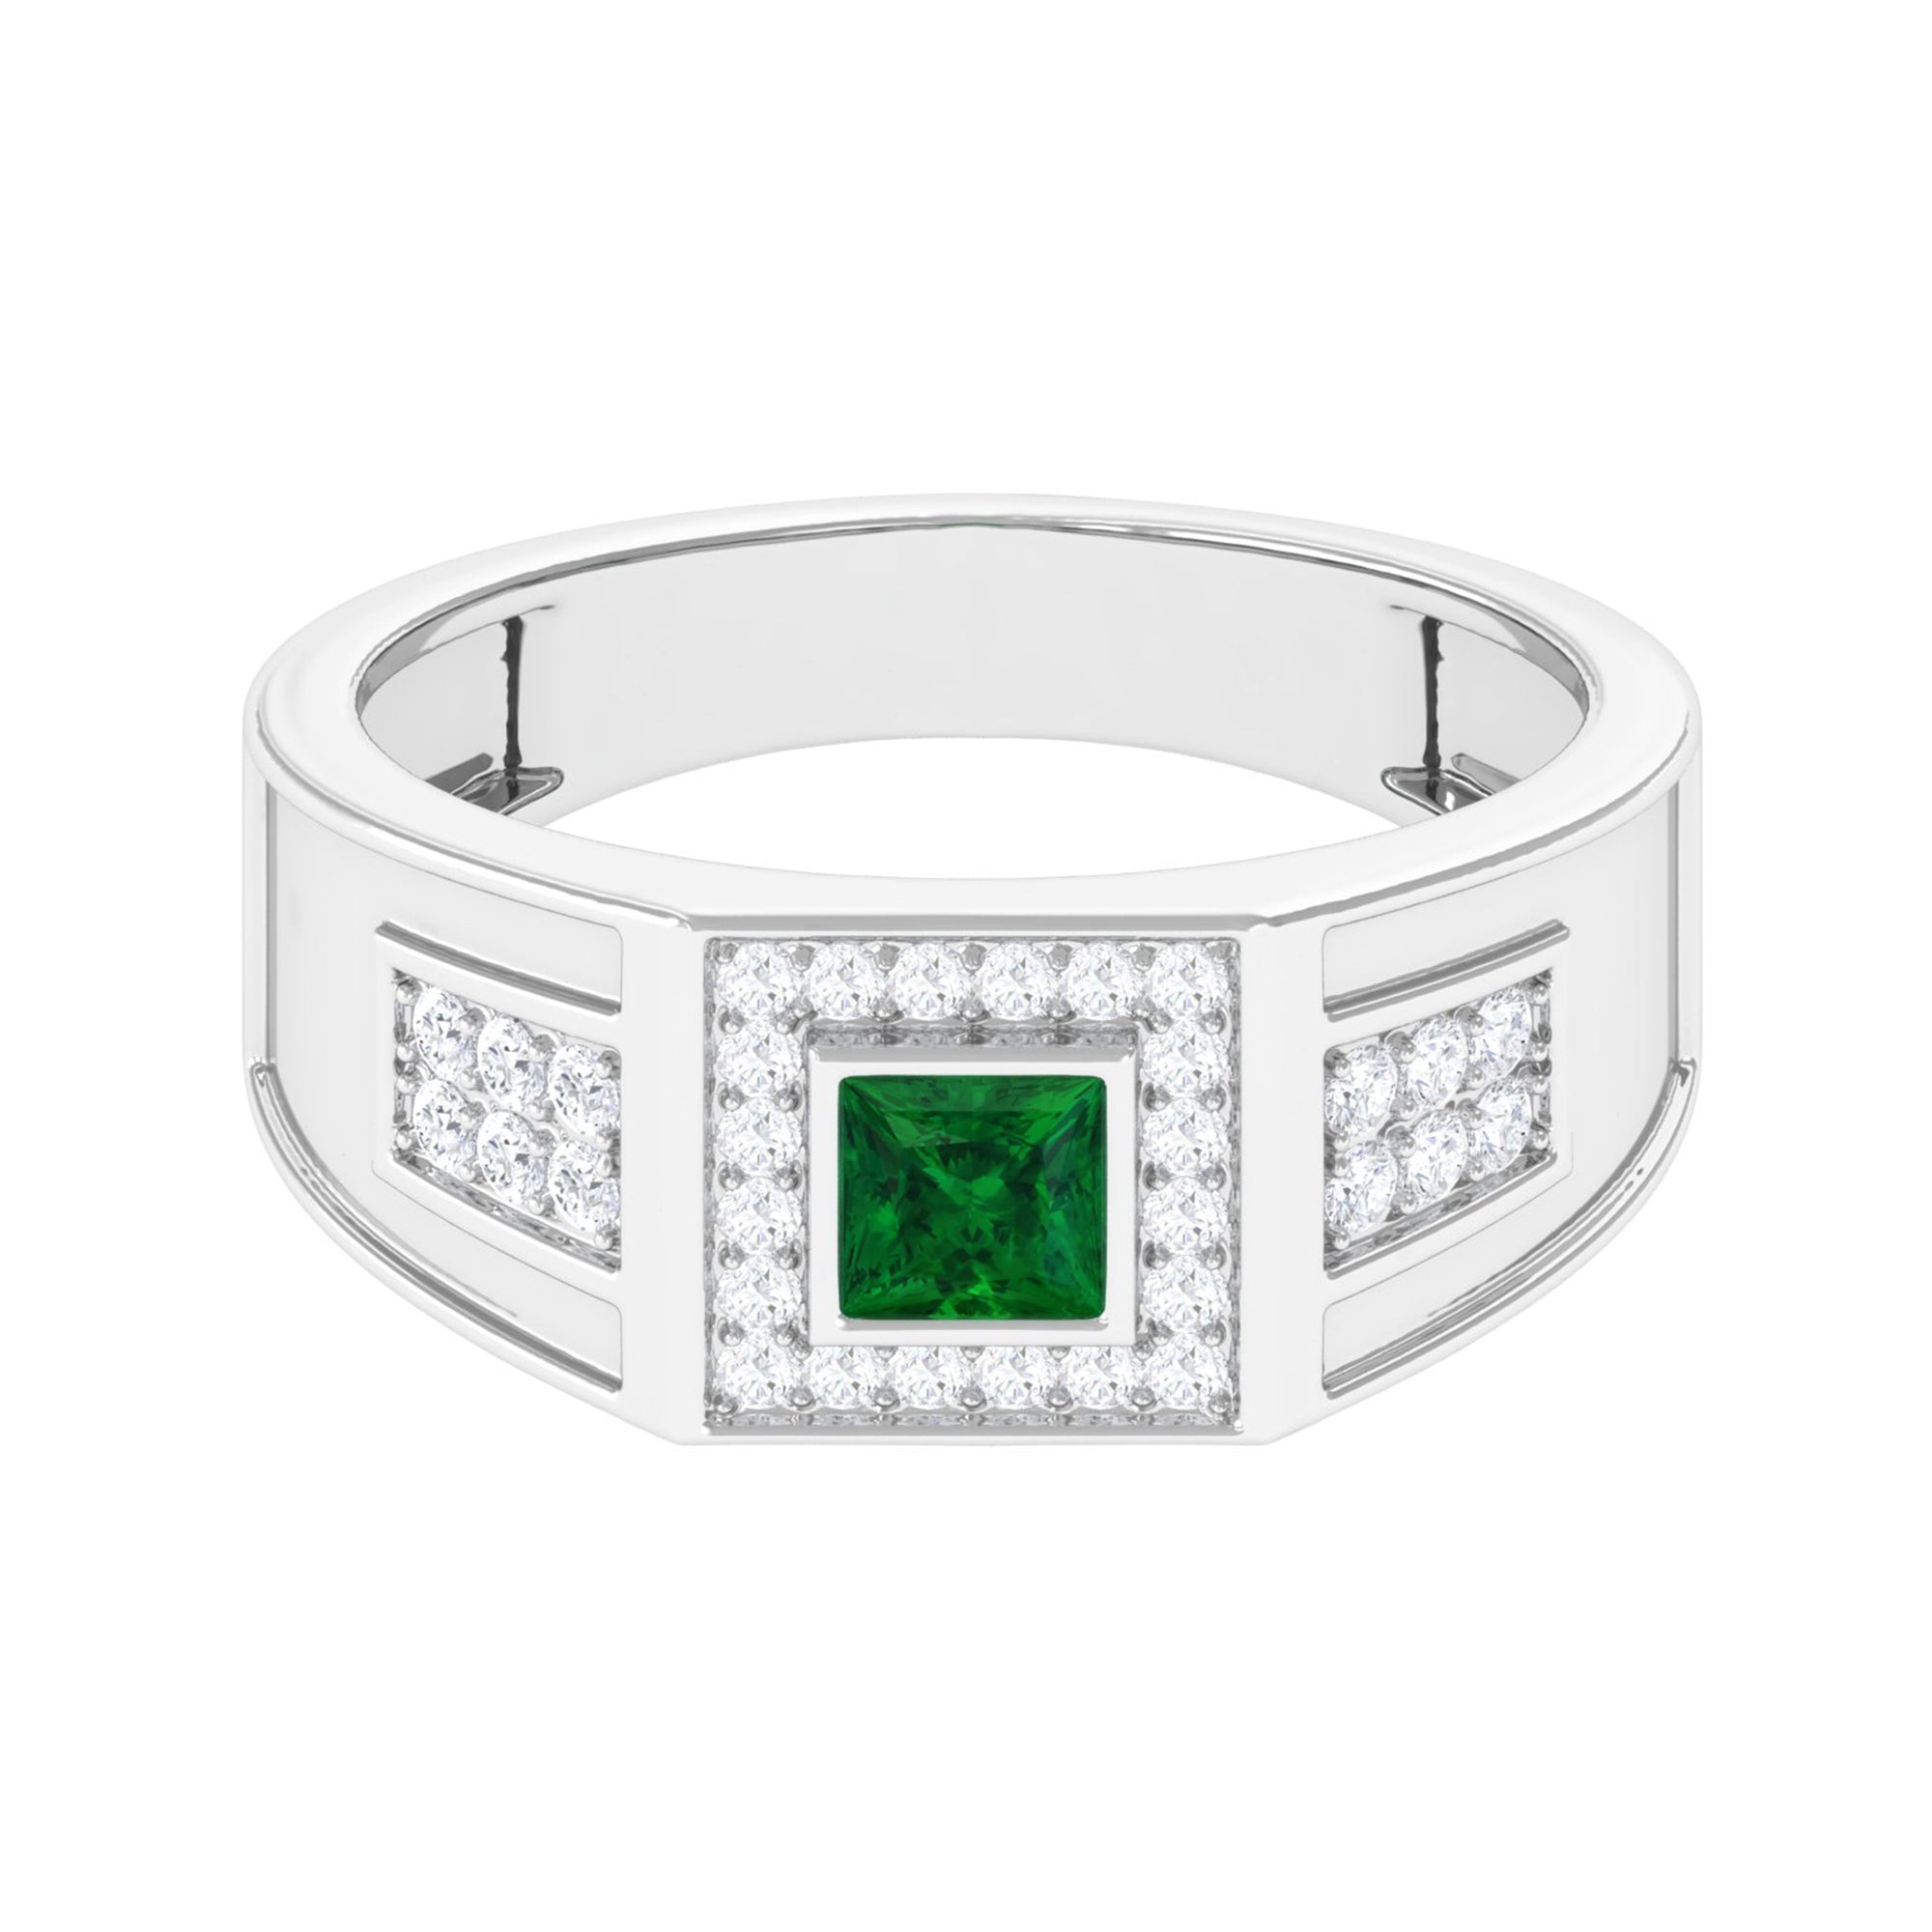 Princess Cut Emerald and Diamond Statement Engagement Ring Lab Grown Emerald-AAAA Quality - Virica Jewels